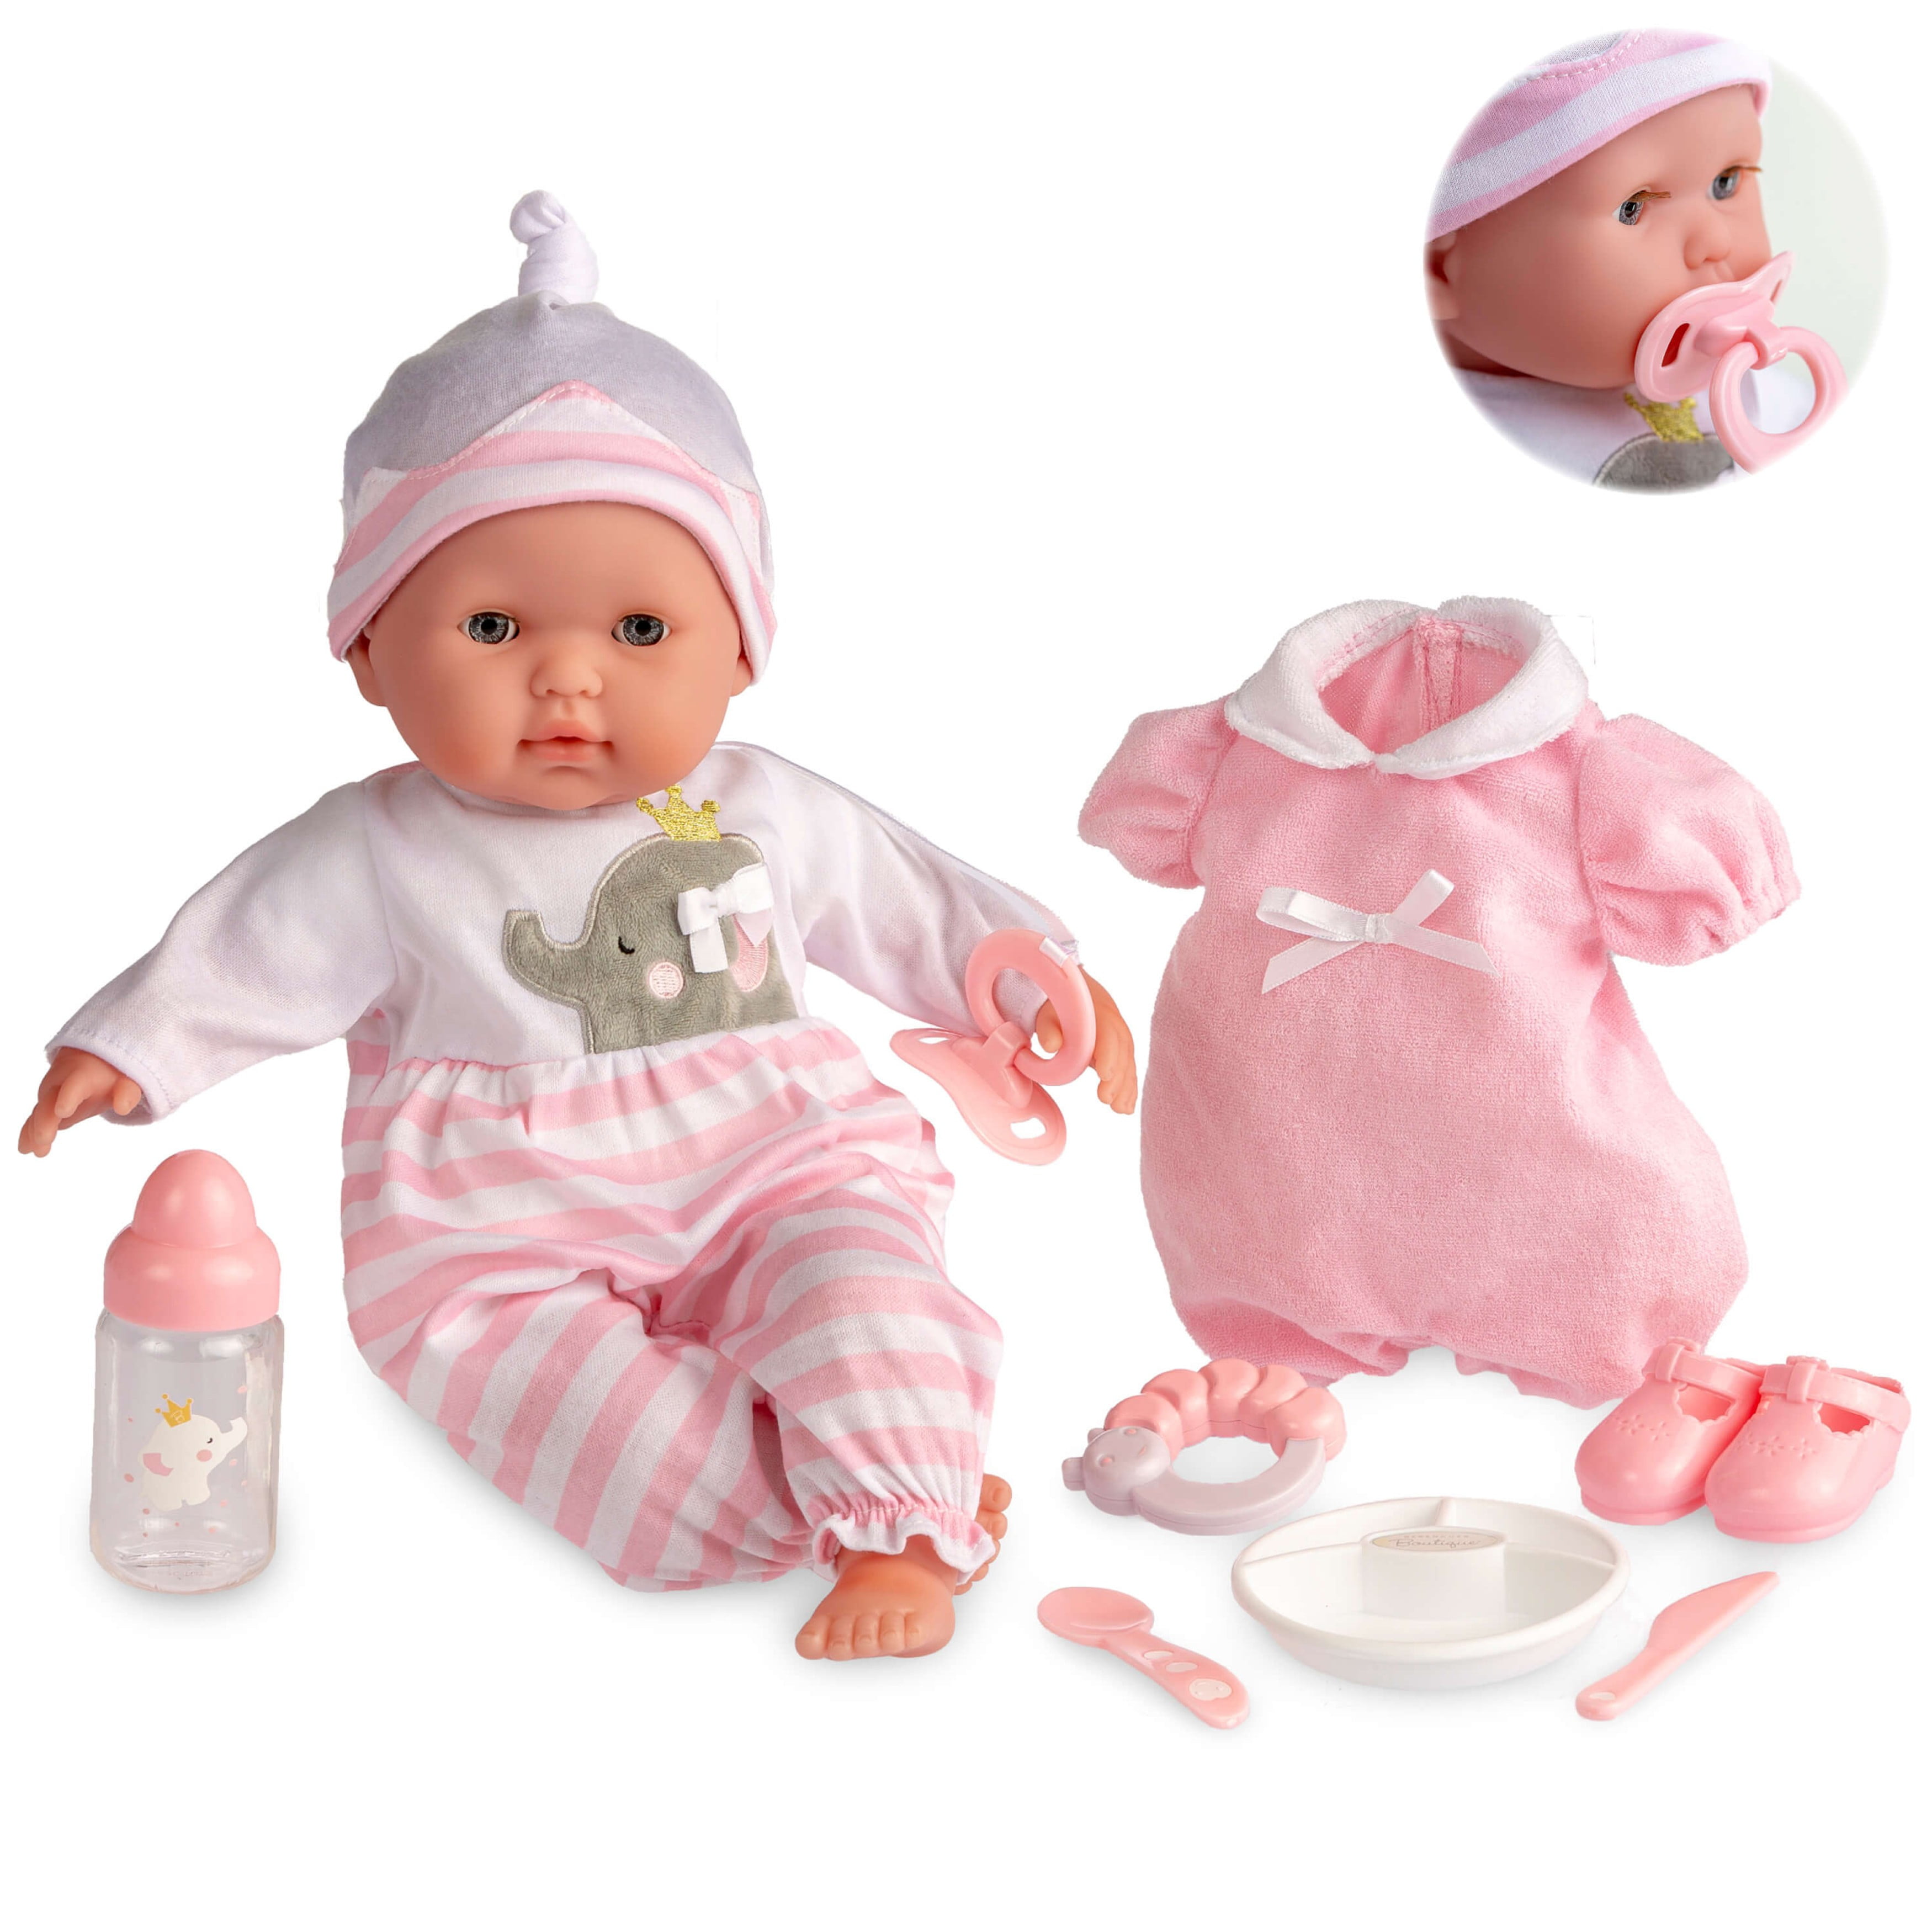 doll box opening Ice cream Diapers for Reborn baby play or shower decorations 